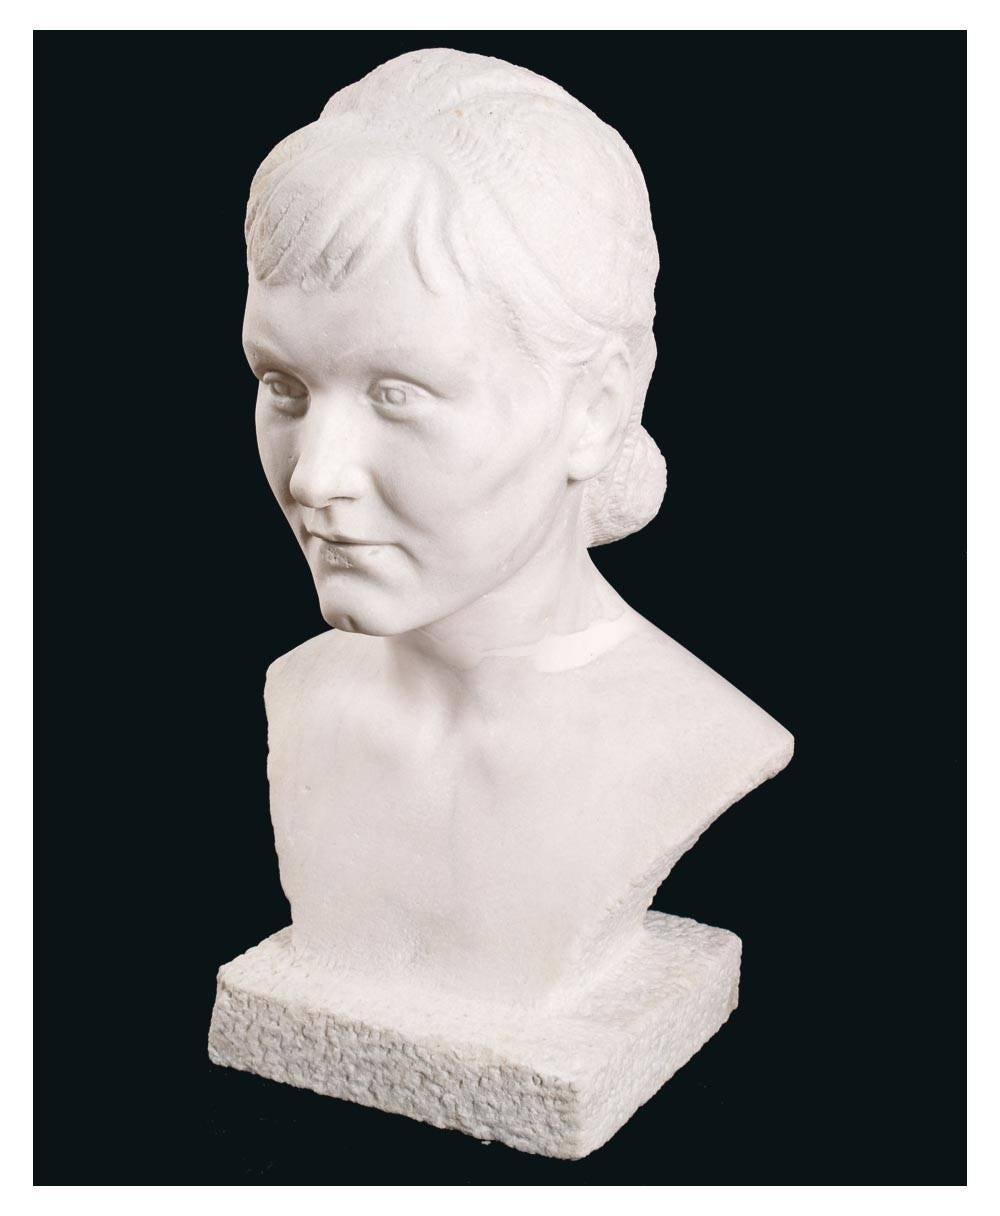 Bust of Eleonora Duse attributable to the sculptor Arrigo Minerbi, from Villa Callas Sirmione of Giovanni Battista Meneghini.
Bust obtained from stone of Istria
Measures: Base cm. 25 x 25, height 60.